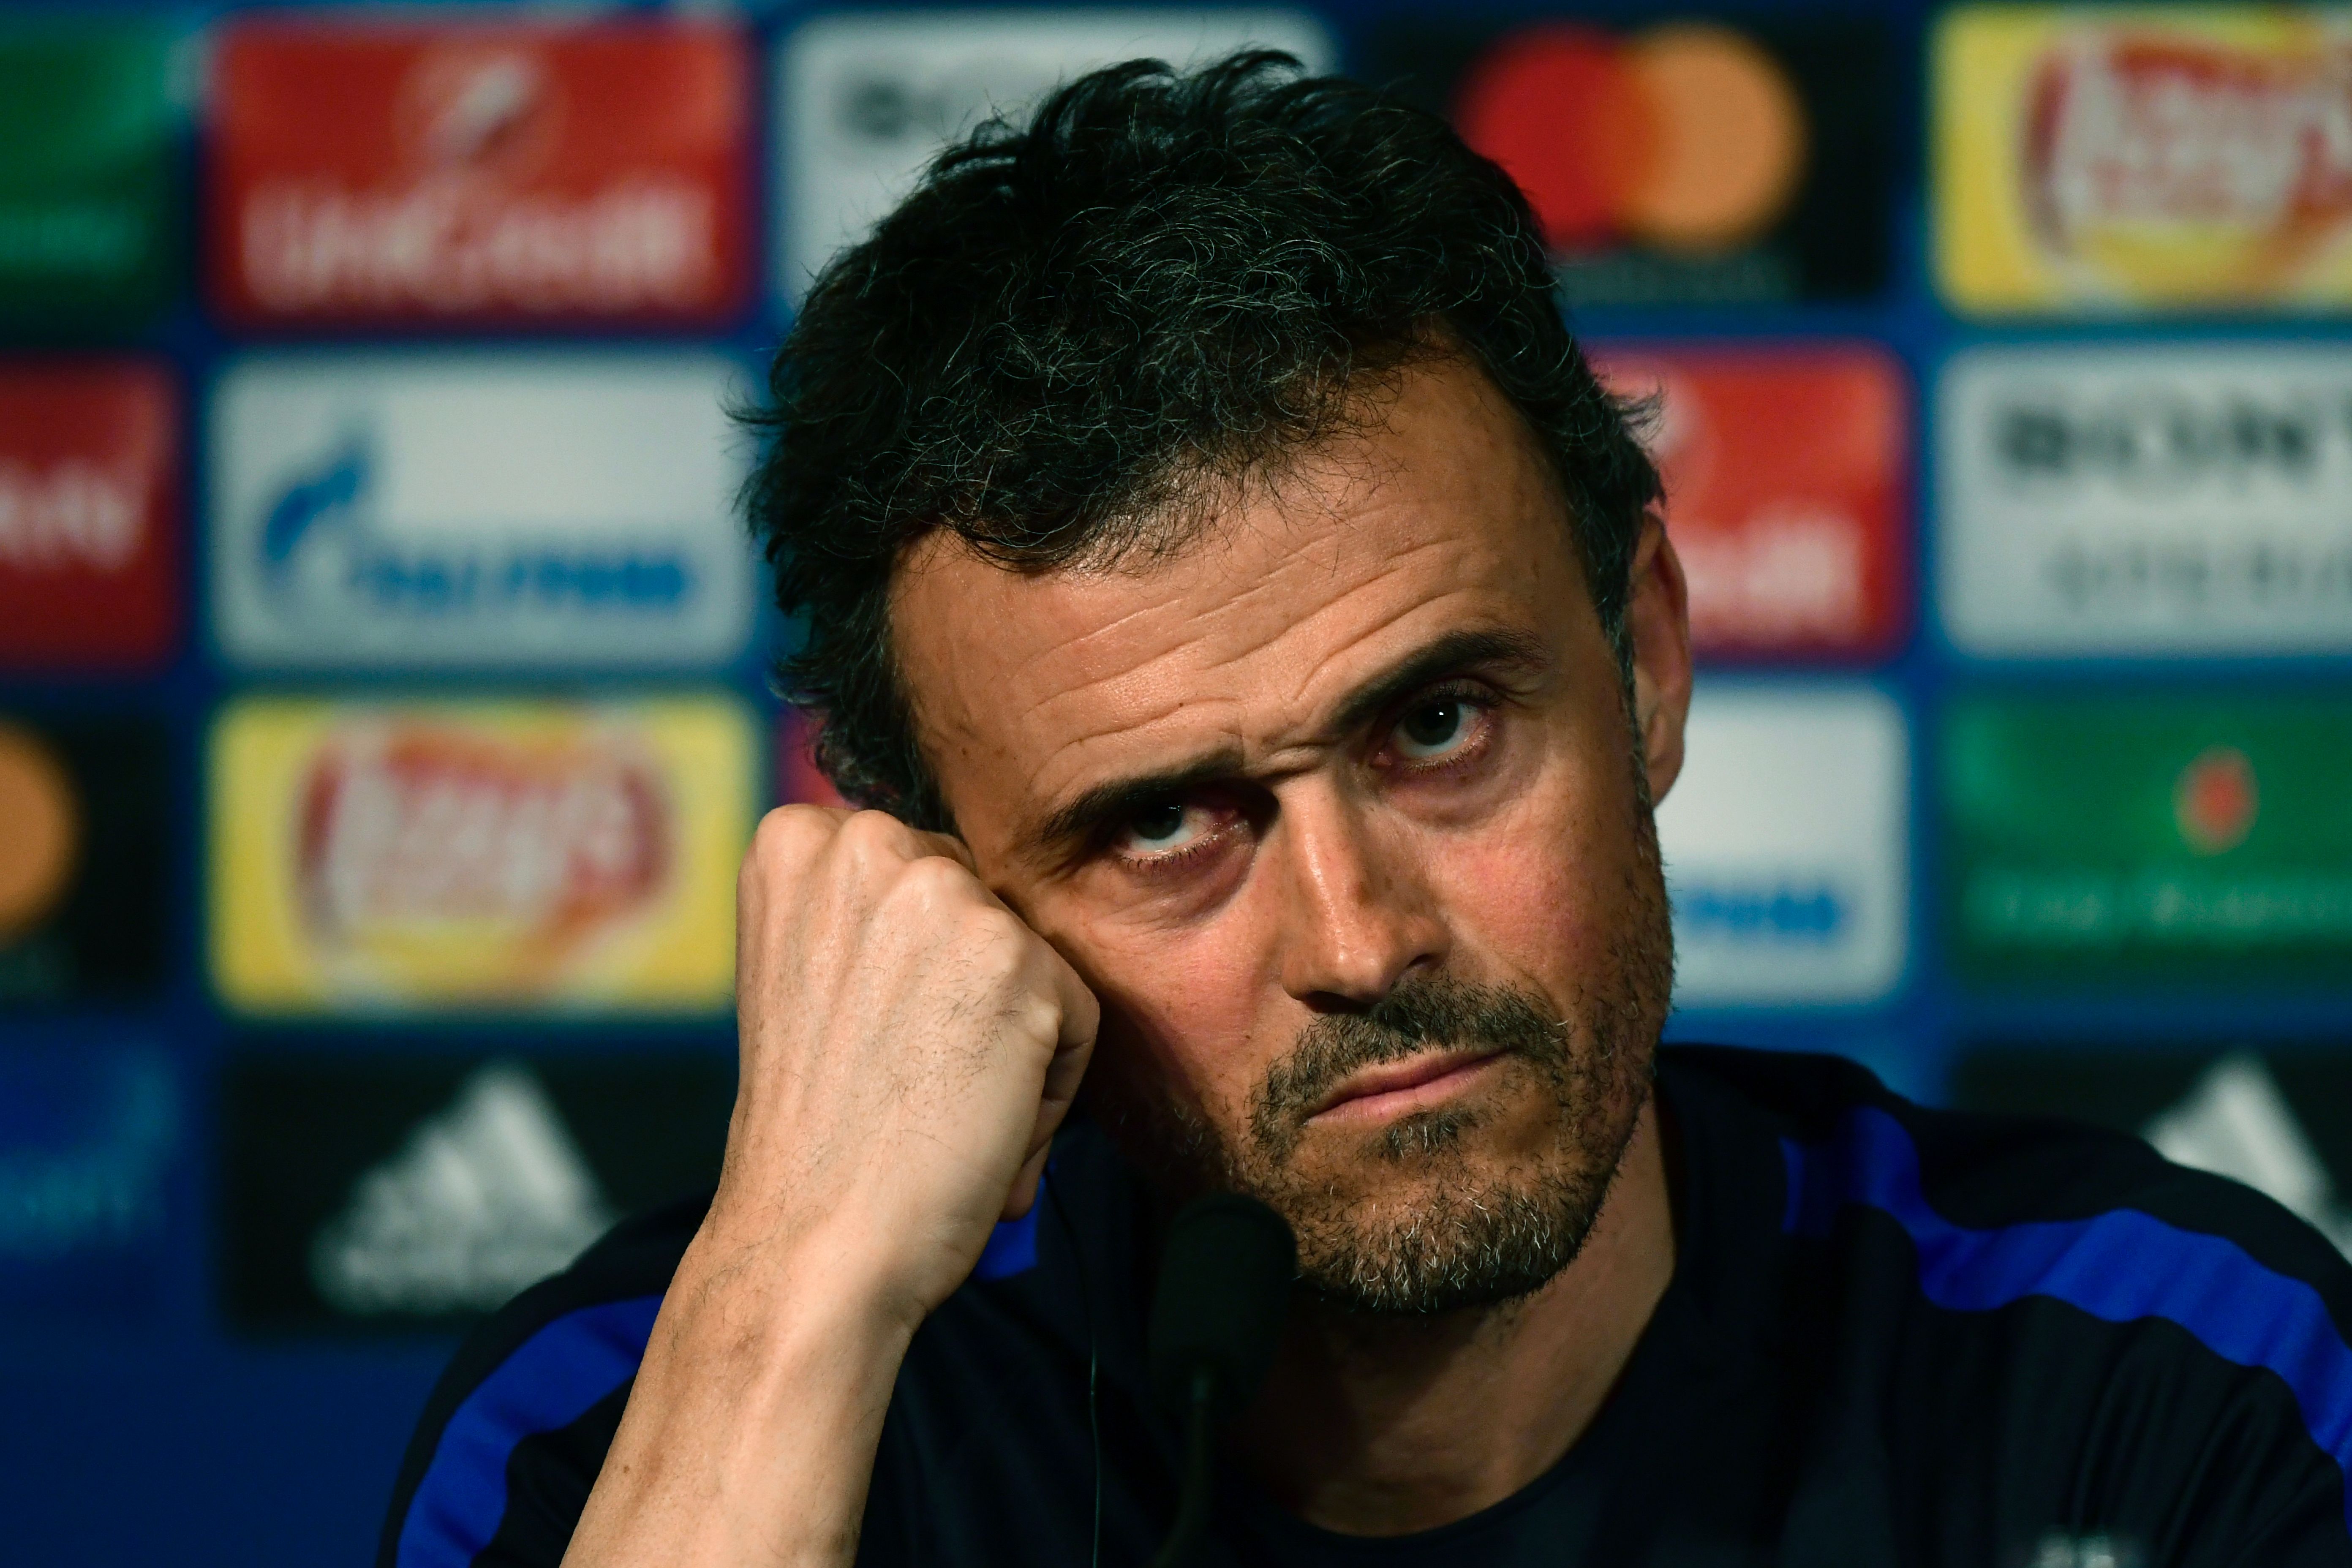 FC Barcelona coach Luis Enrique looks over during the press conference on the eve of the Champions League last 16 first leg against (PSG) Paris Saint-Germain, at the stade de France on February 13, 2017. / AFP / CHRISTOPHE SIMON        (Photo credit should read CHRISTOPHE SIMON/AFP/Getty Images)